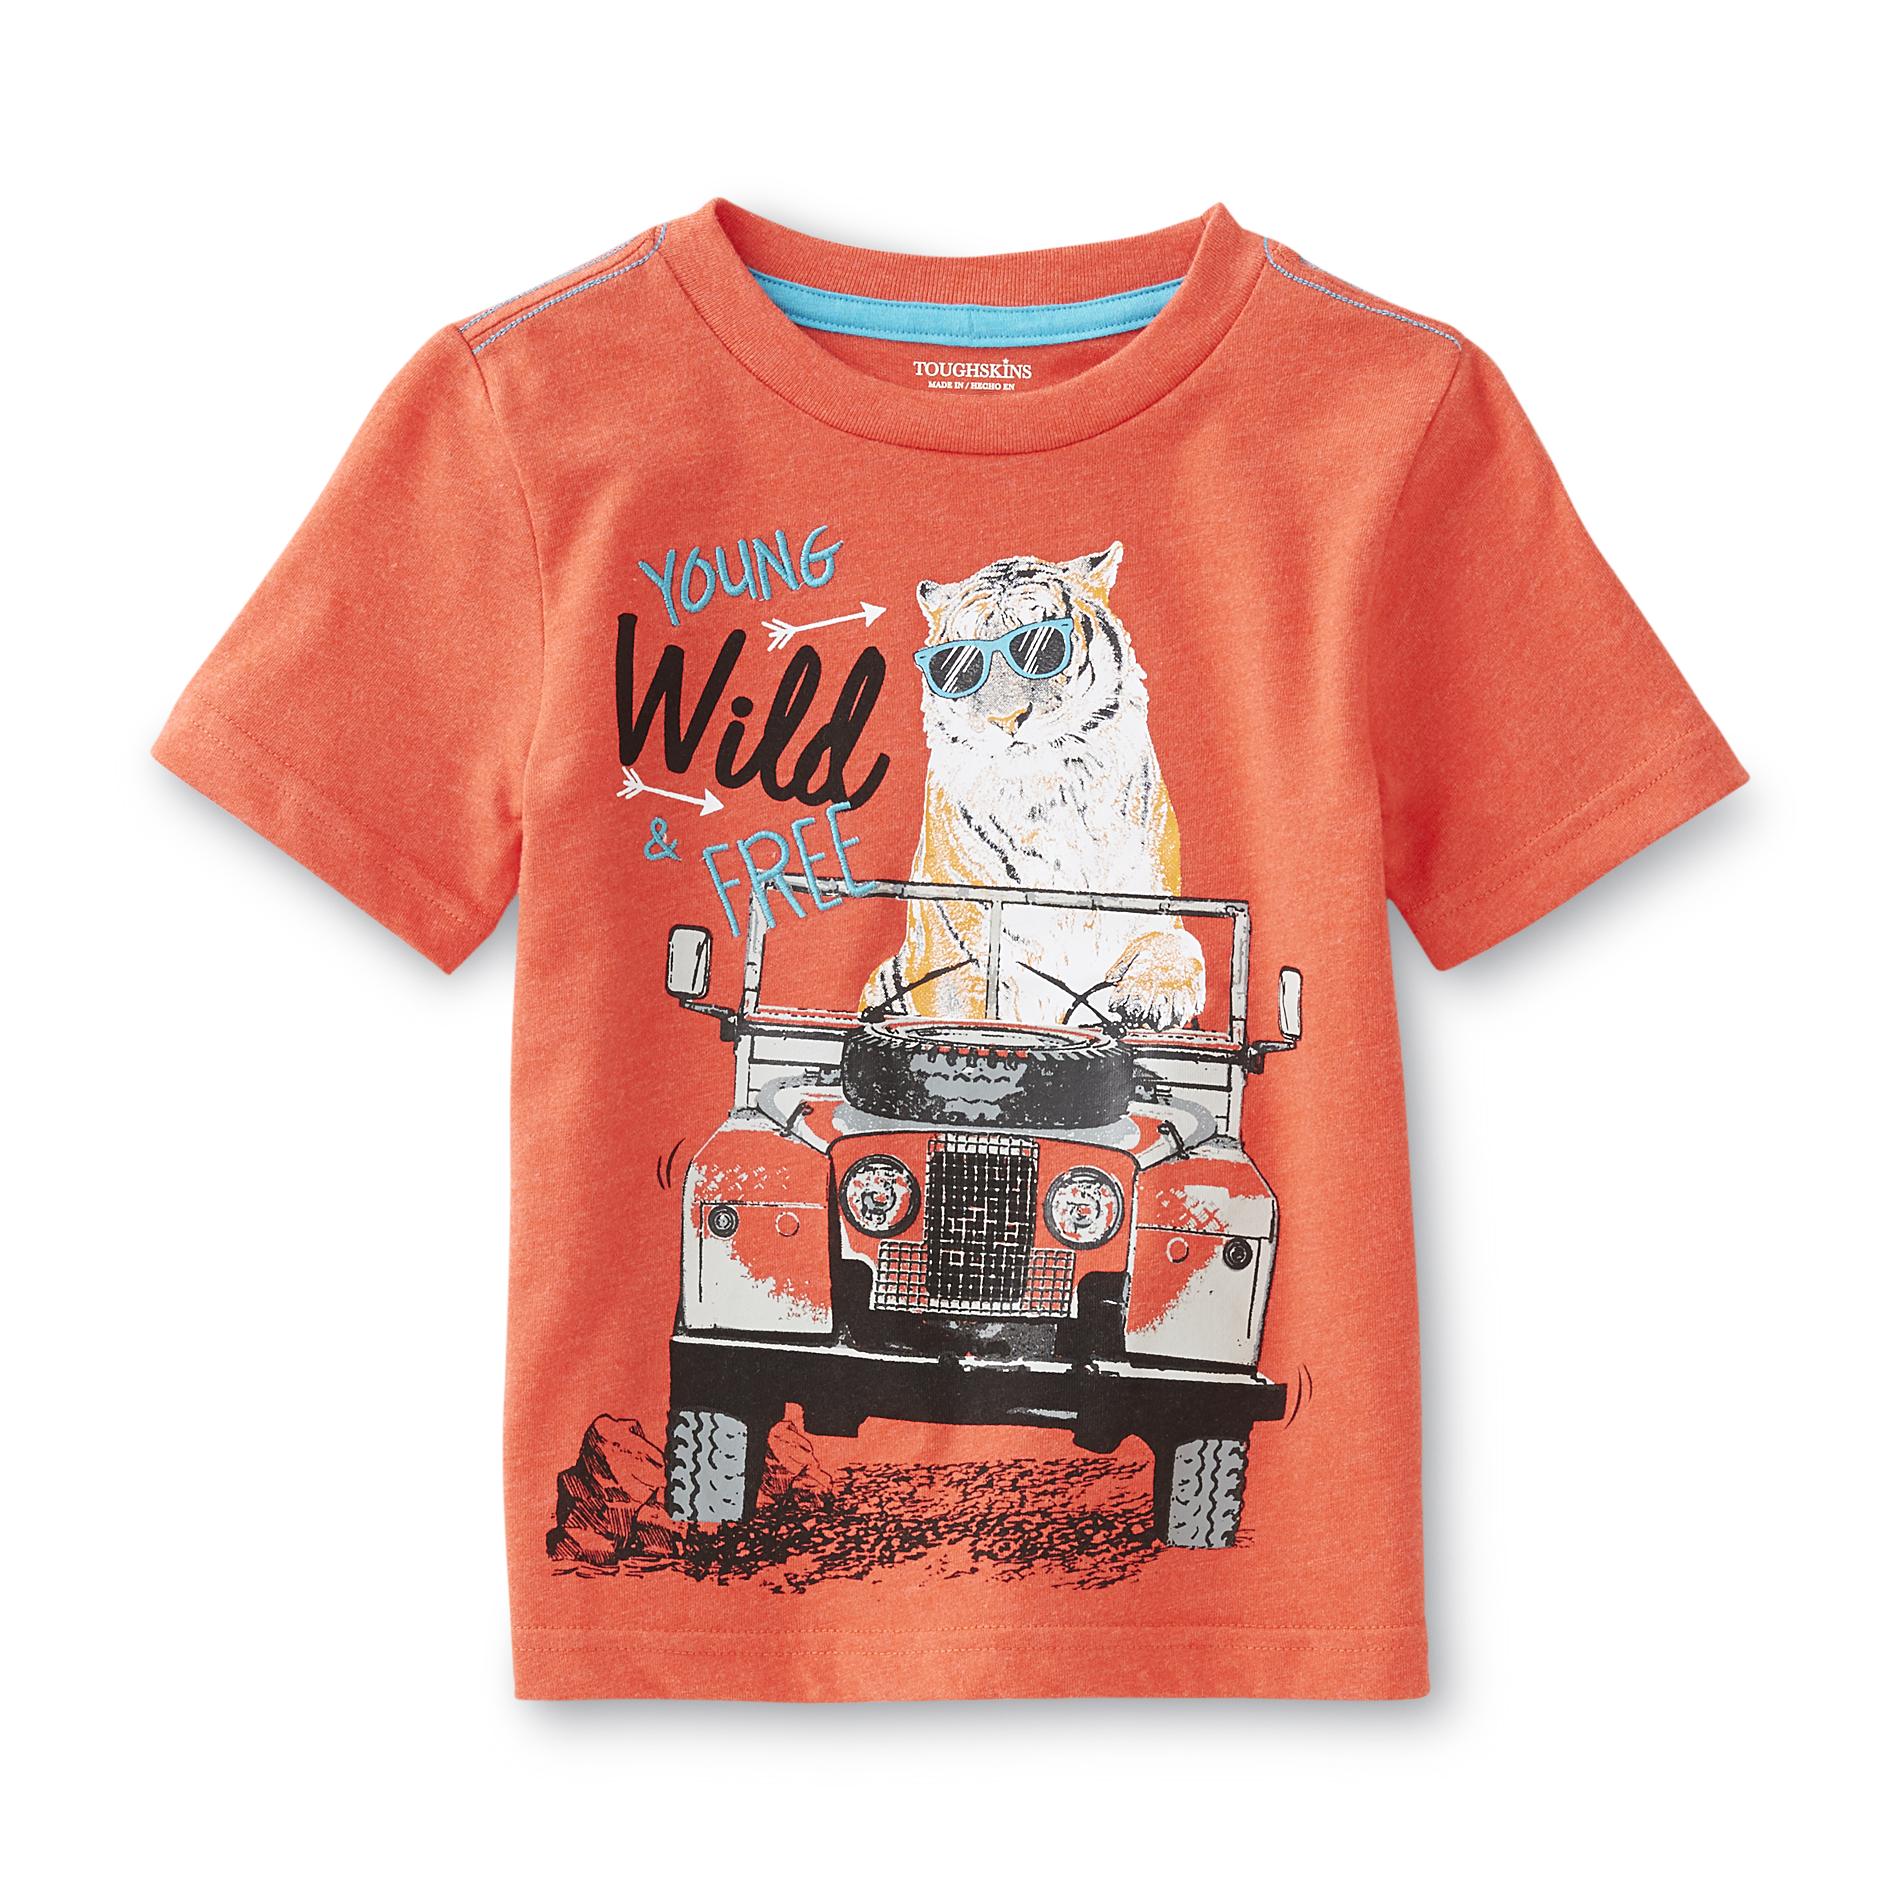 Boy's Graphic T-Shirt - Young, Wild & Free